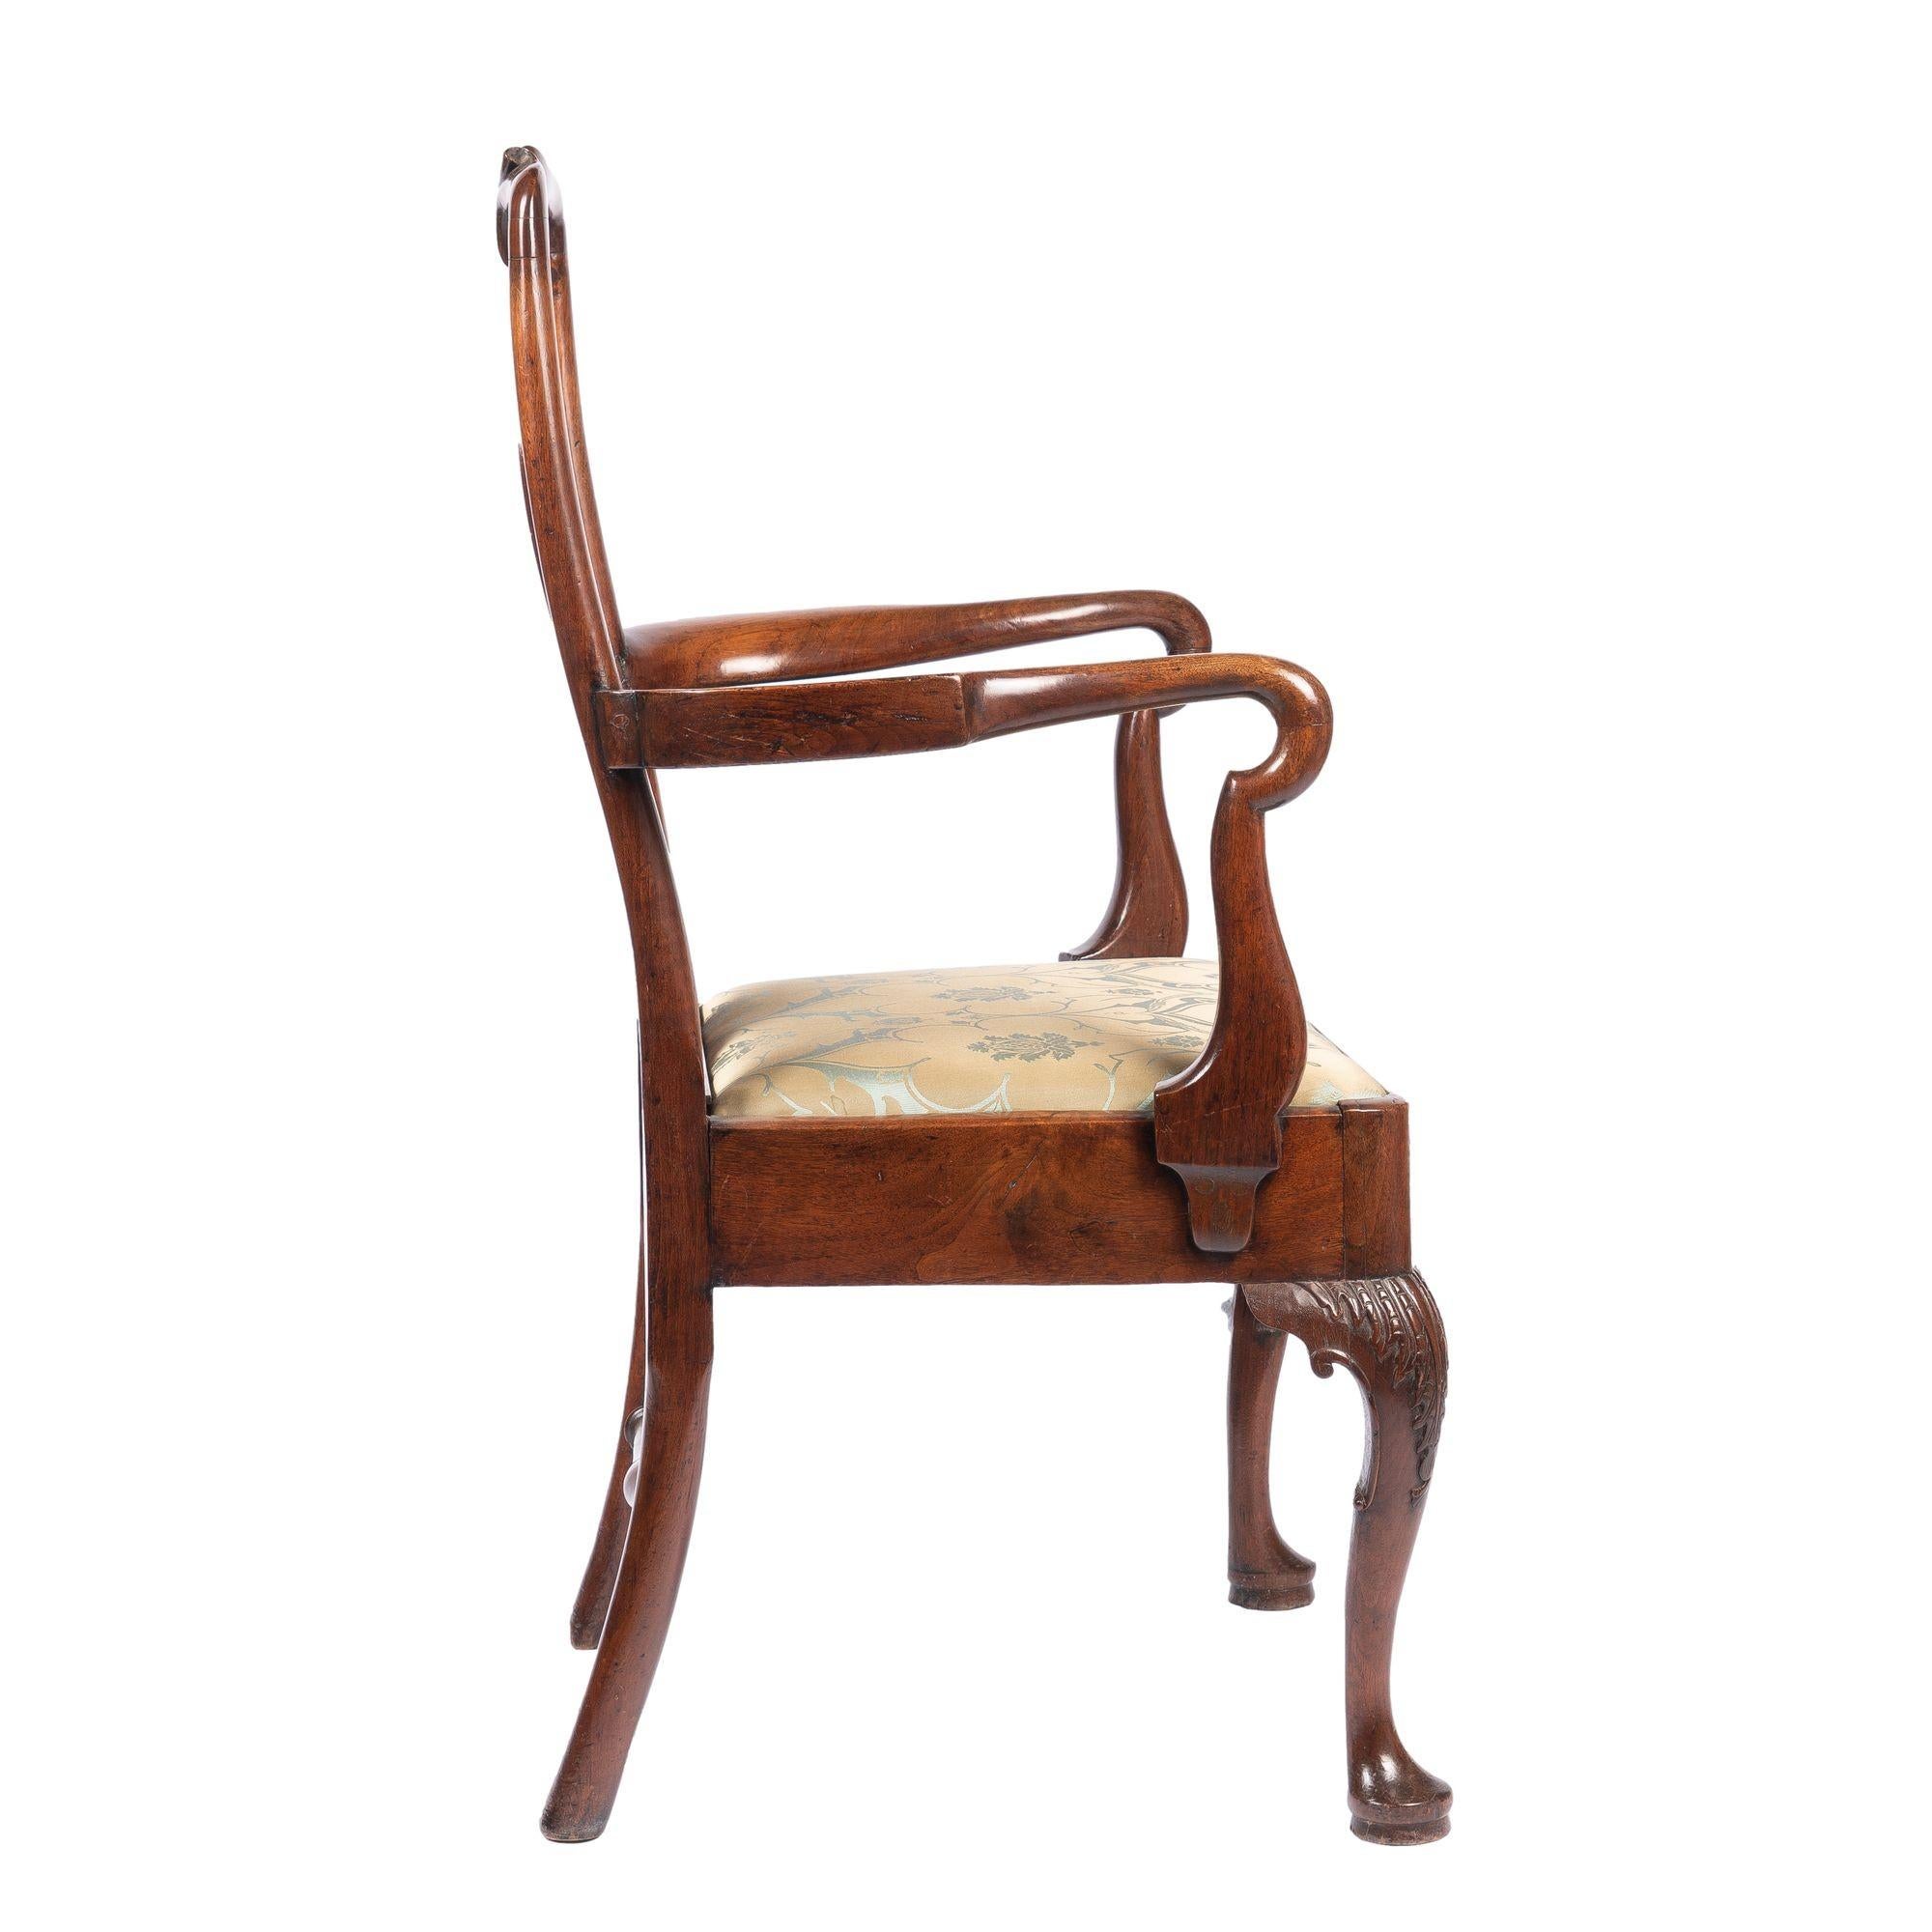 English Georgian Mahogany Armchair with Upholstered Slip Seat, c. 1720 For Sale 1